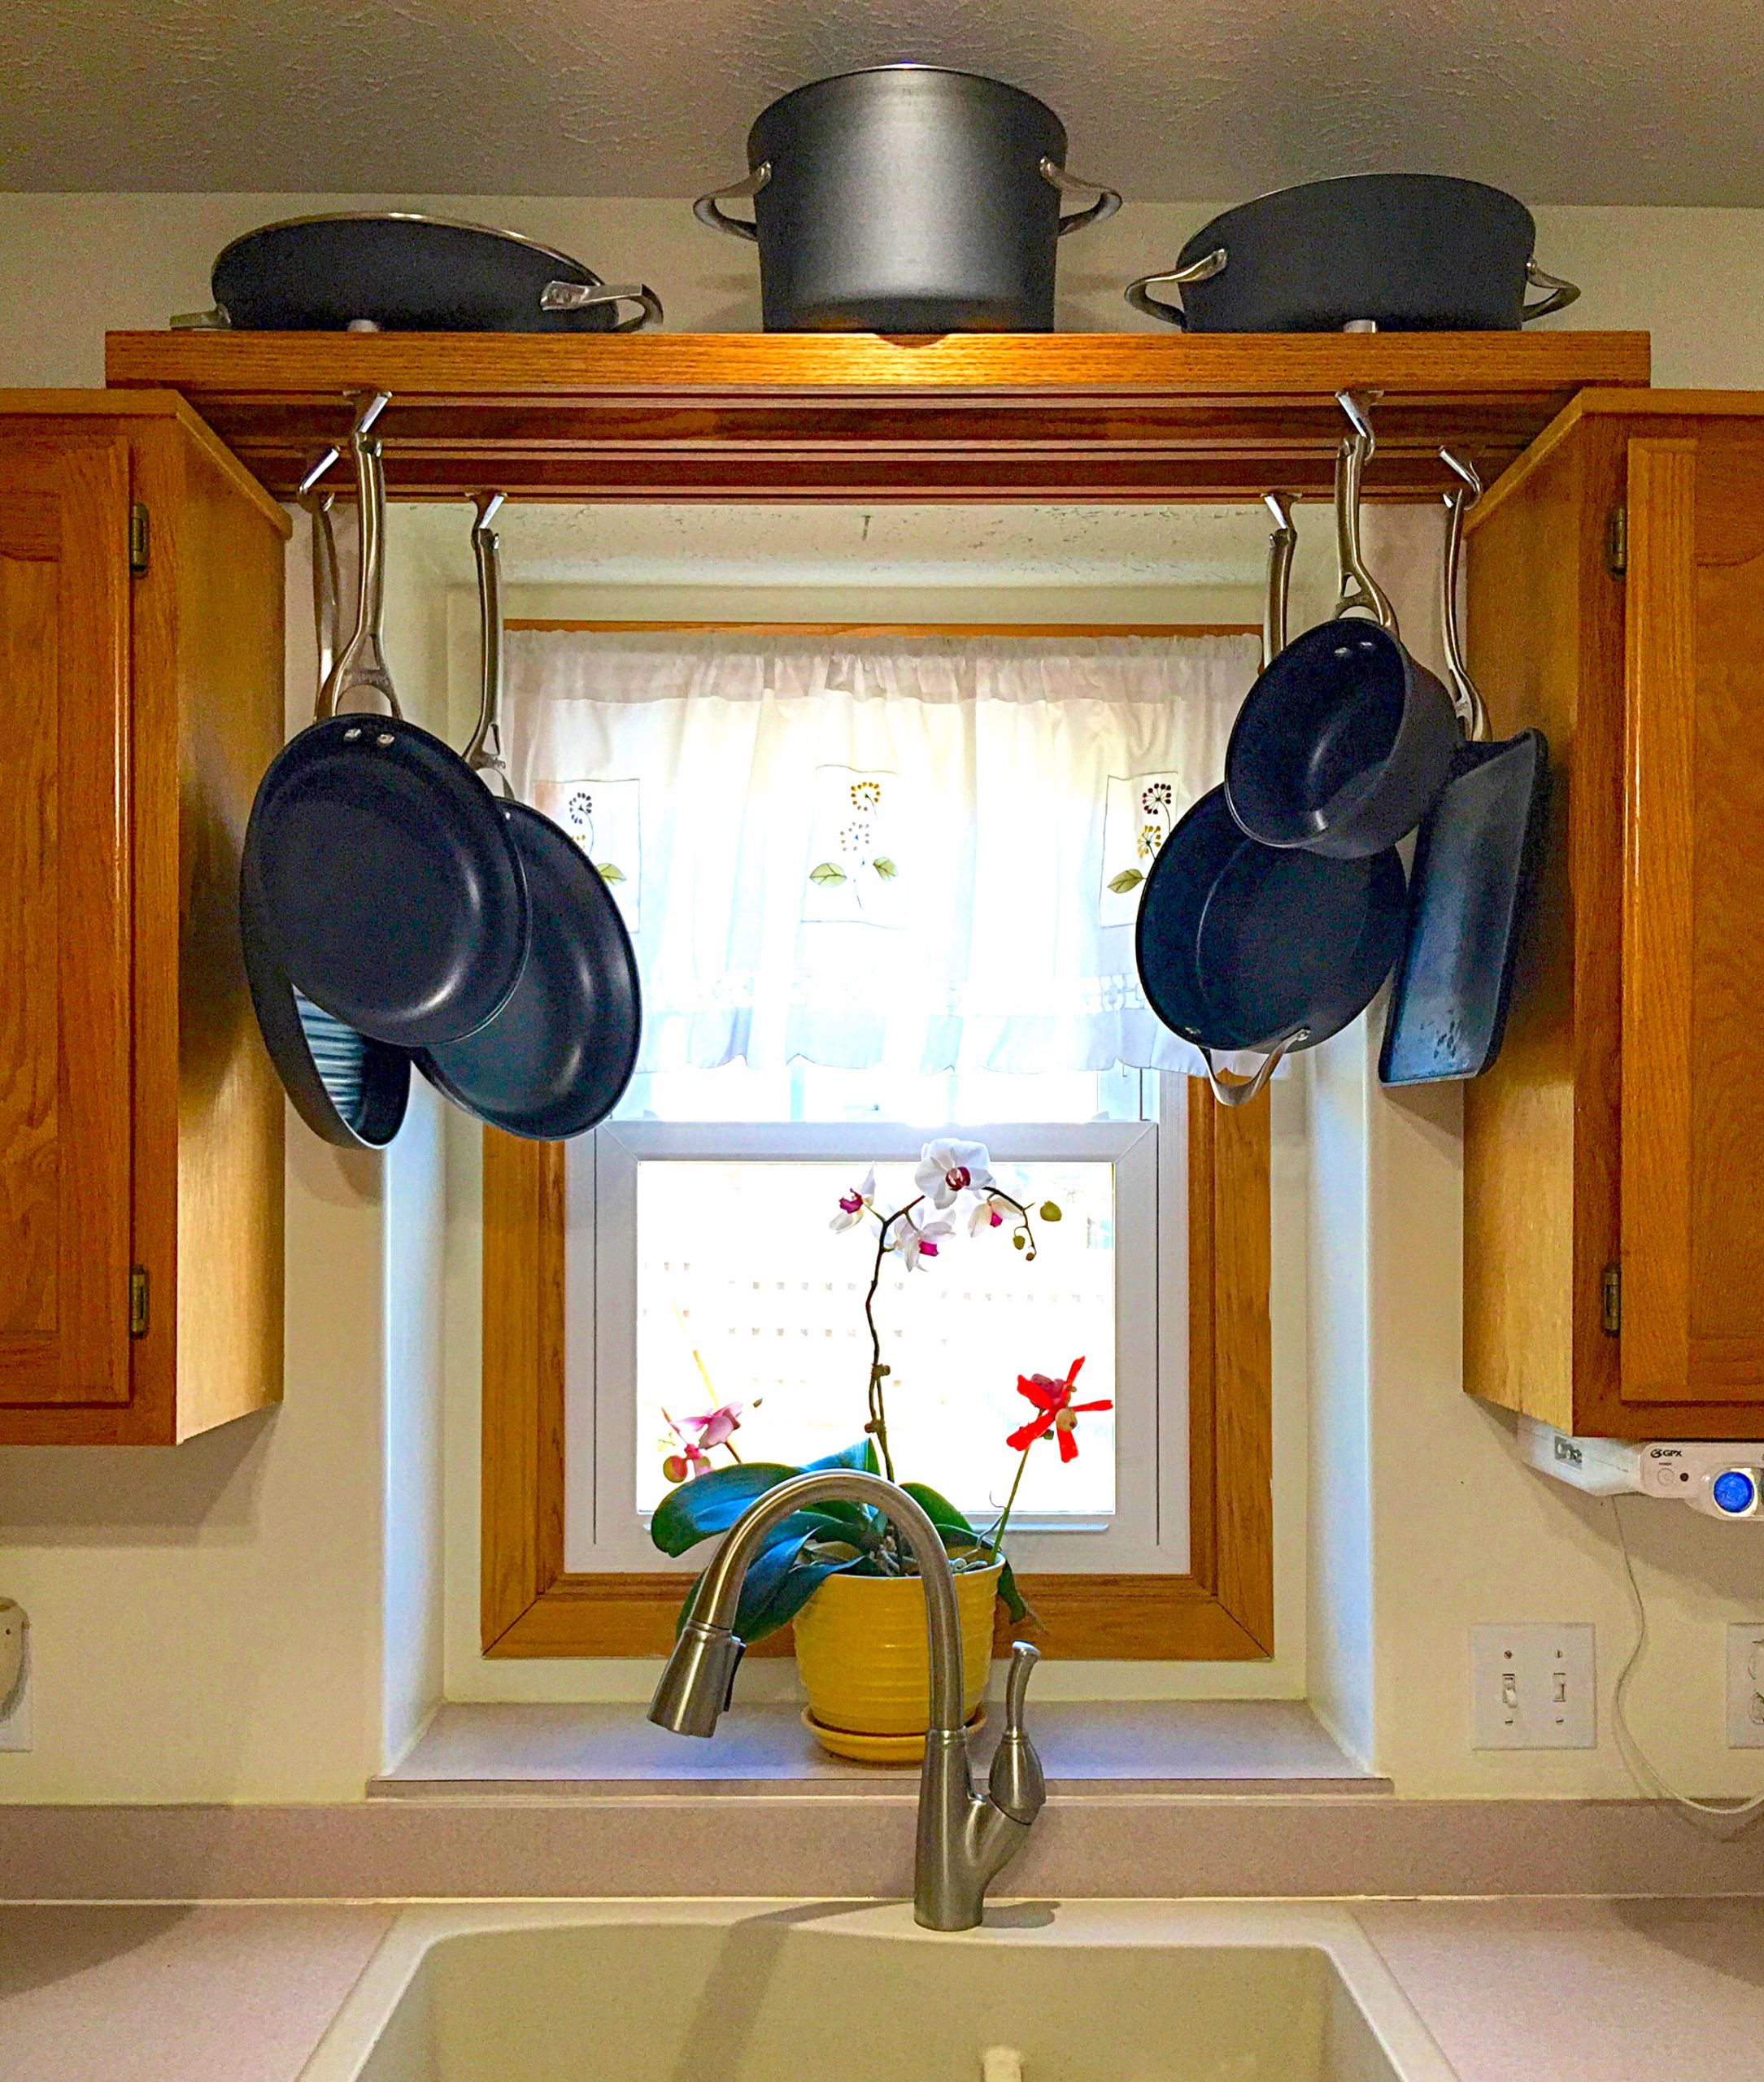 DIY Pot Rack
 Make use of space over the kitchen sink with this DIY pot